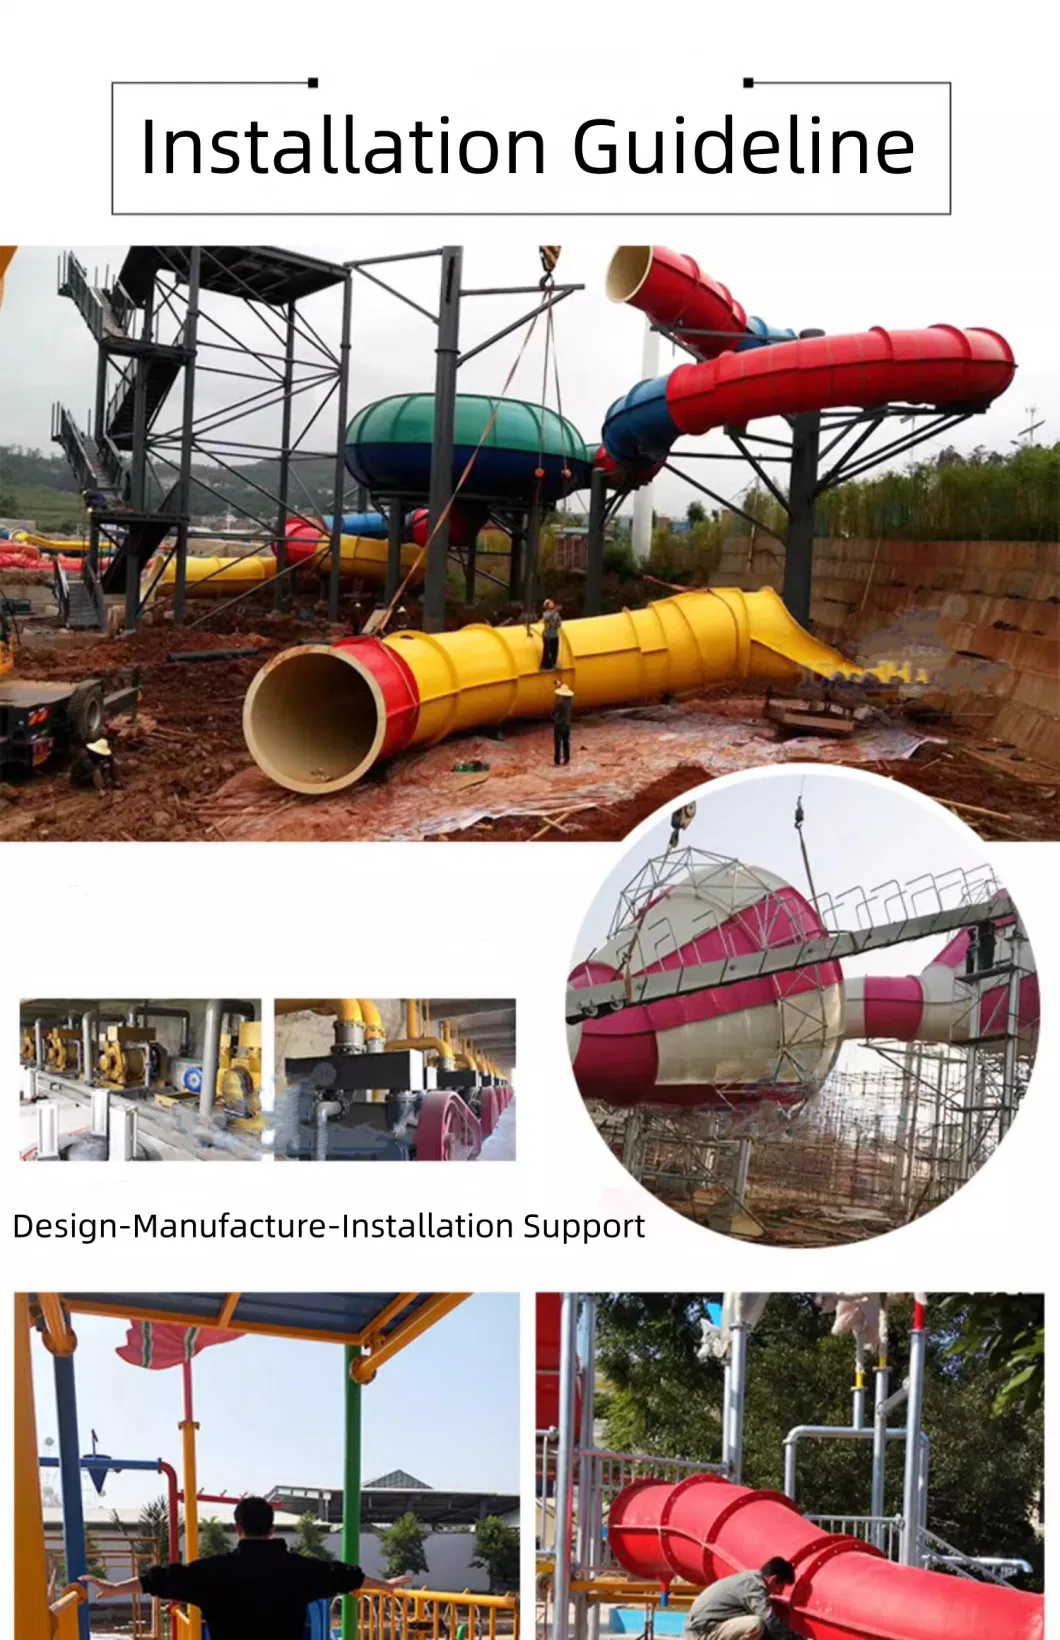 Water Slide Exciting Slide Spiral Water Slide for Outdoor Park Games Water Floating Entertainment